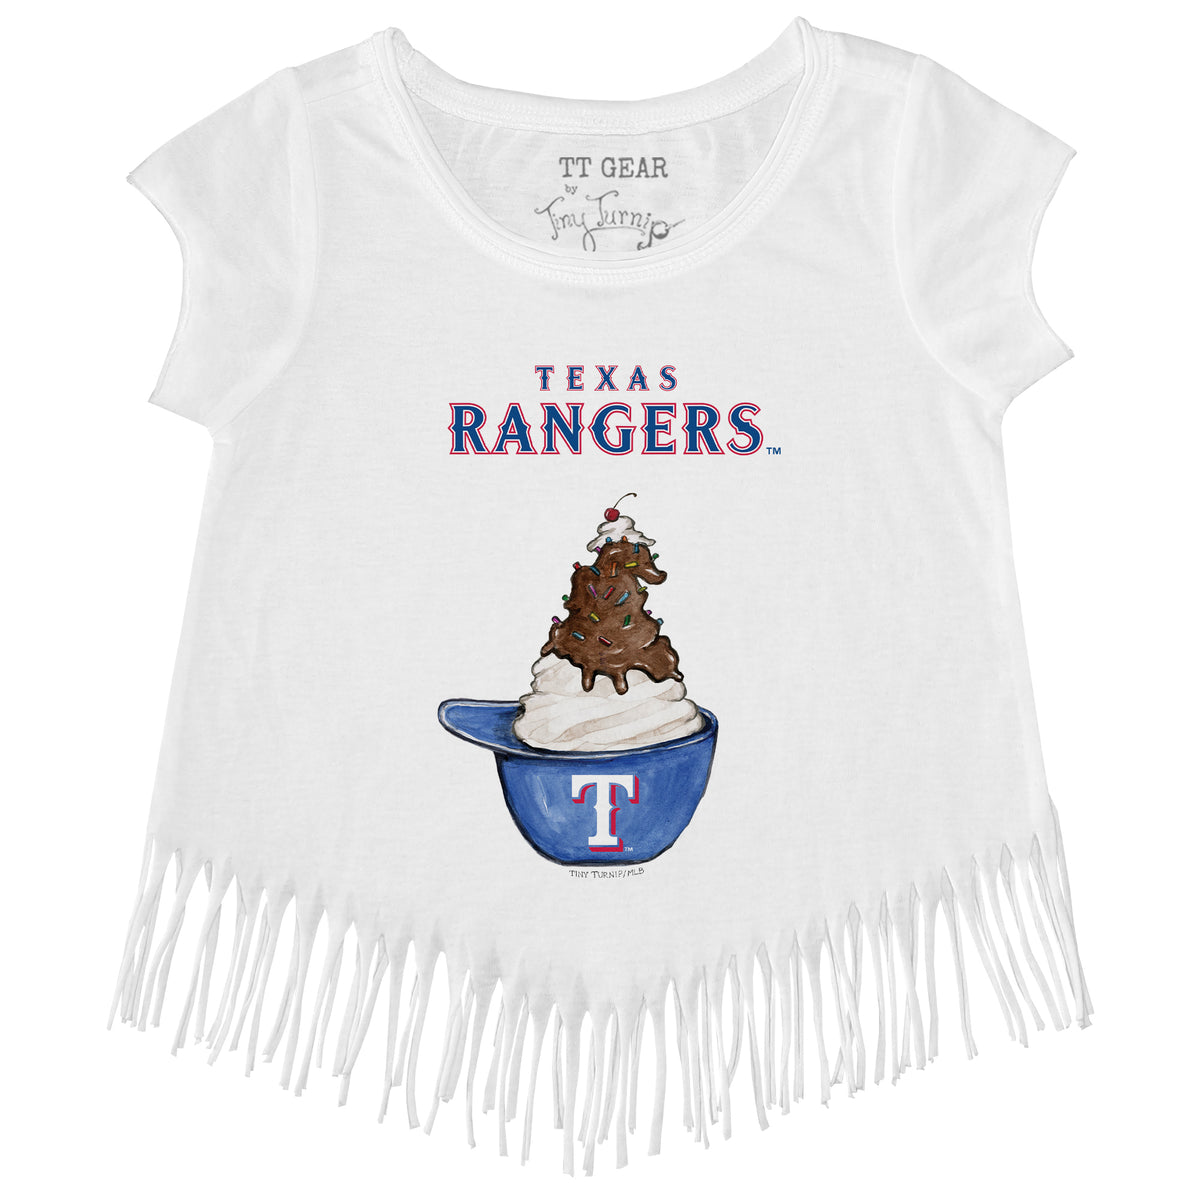 Texas Rangers S'mores Fringe Tee Youth XL (14) / Royal Blue